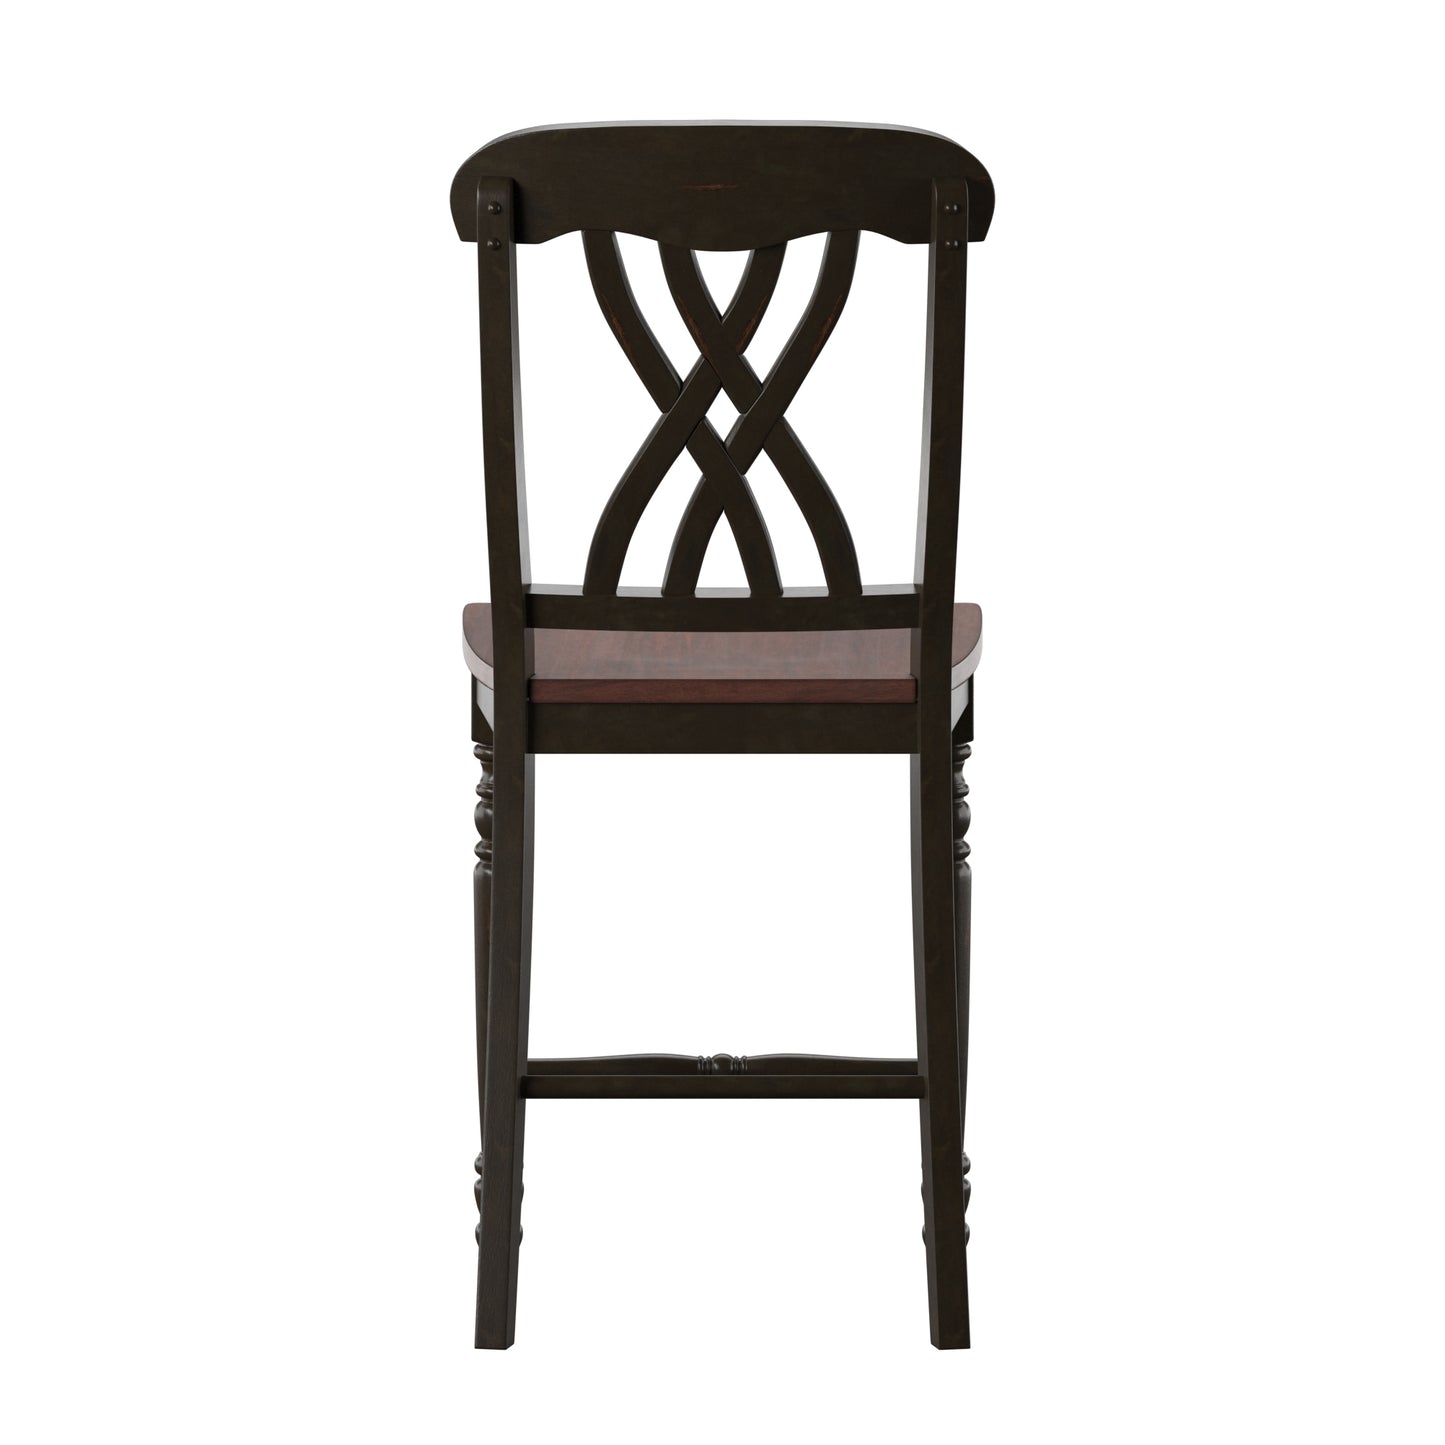 Two-Tone Counter Height Chairs (Set of 2) - Antique Black, Scroll Back